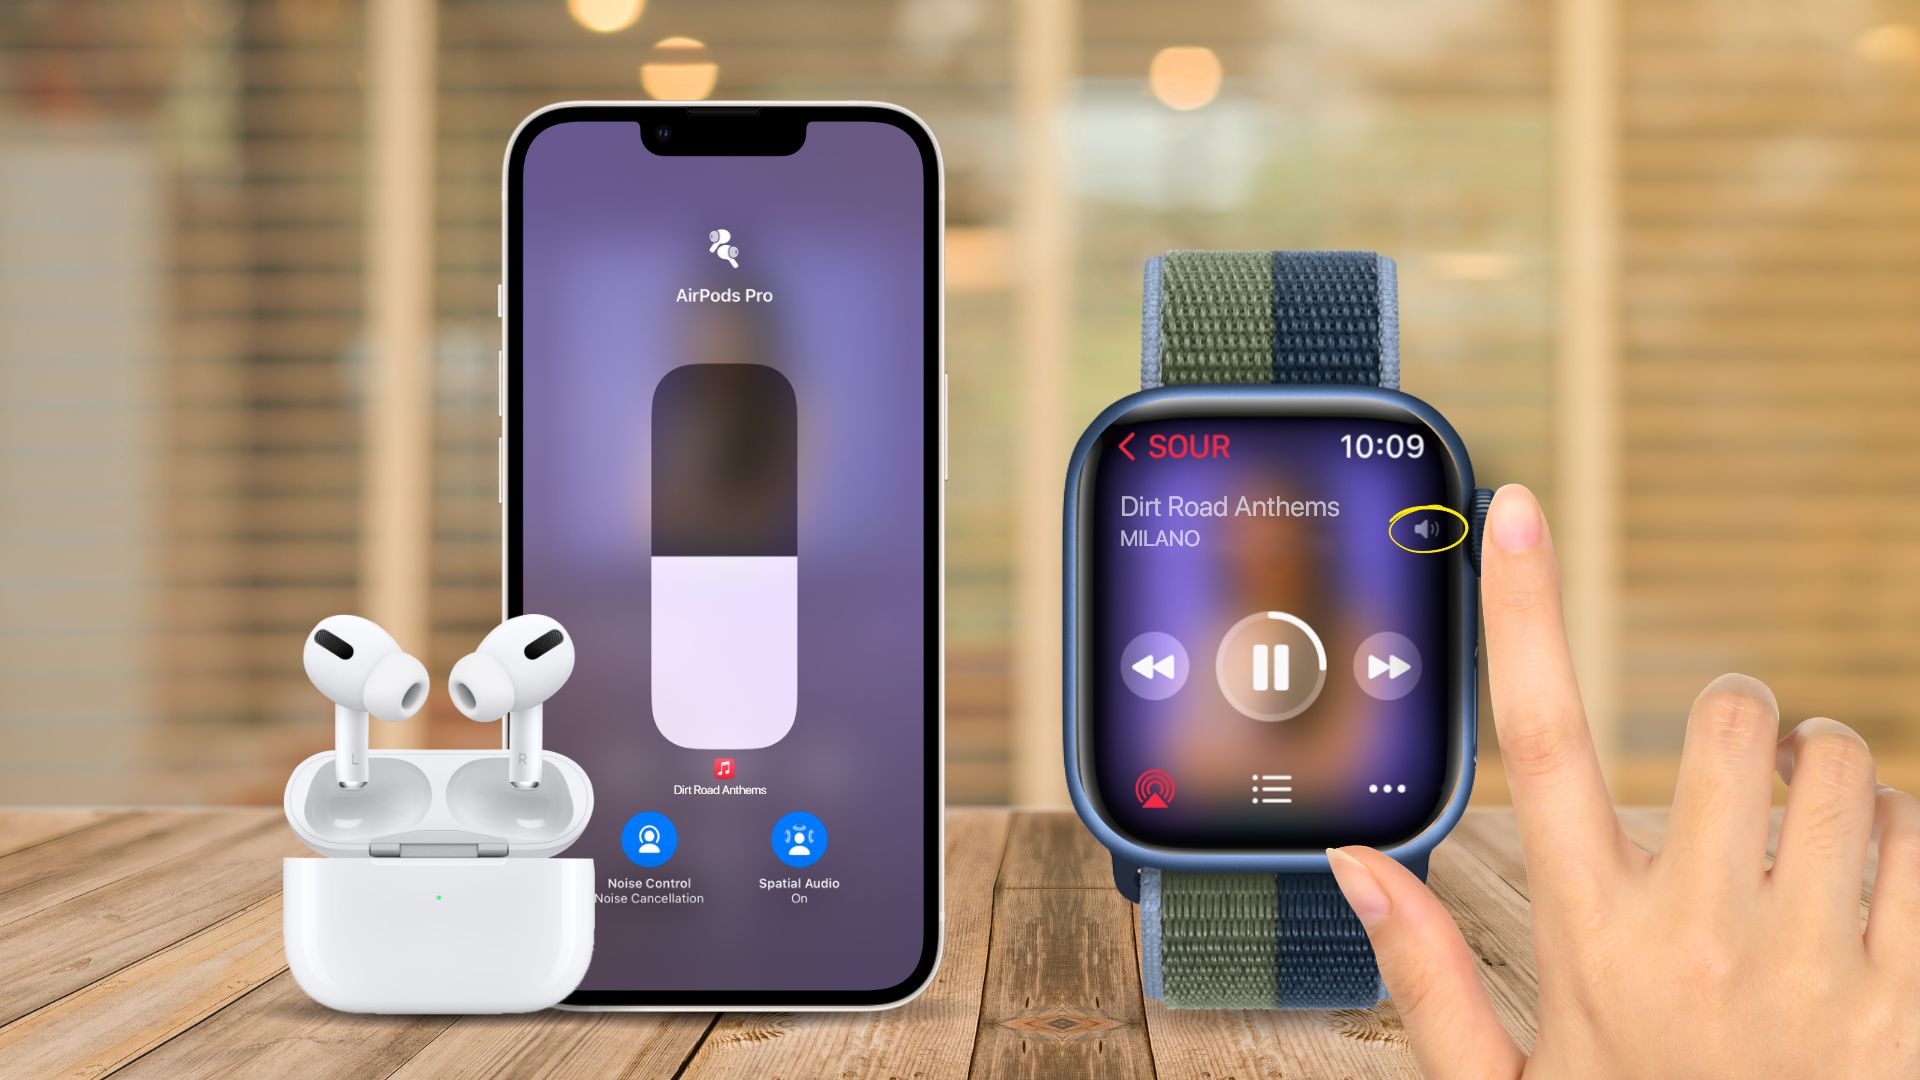 AirPods volume control on iPhone and Apple Watch